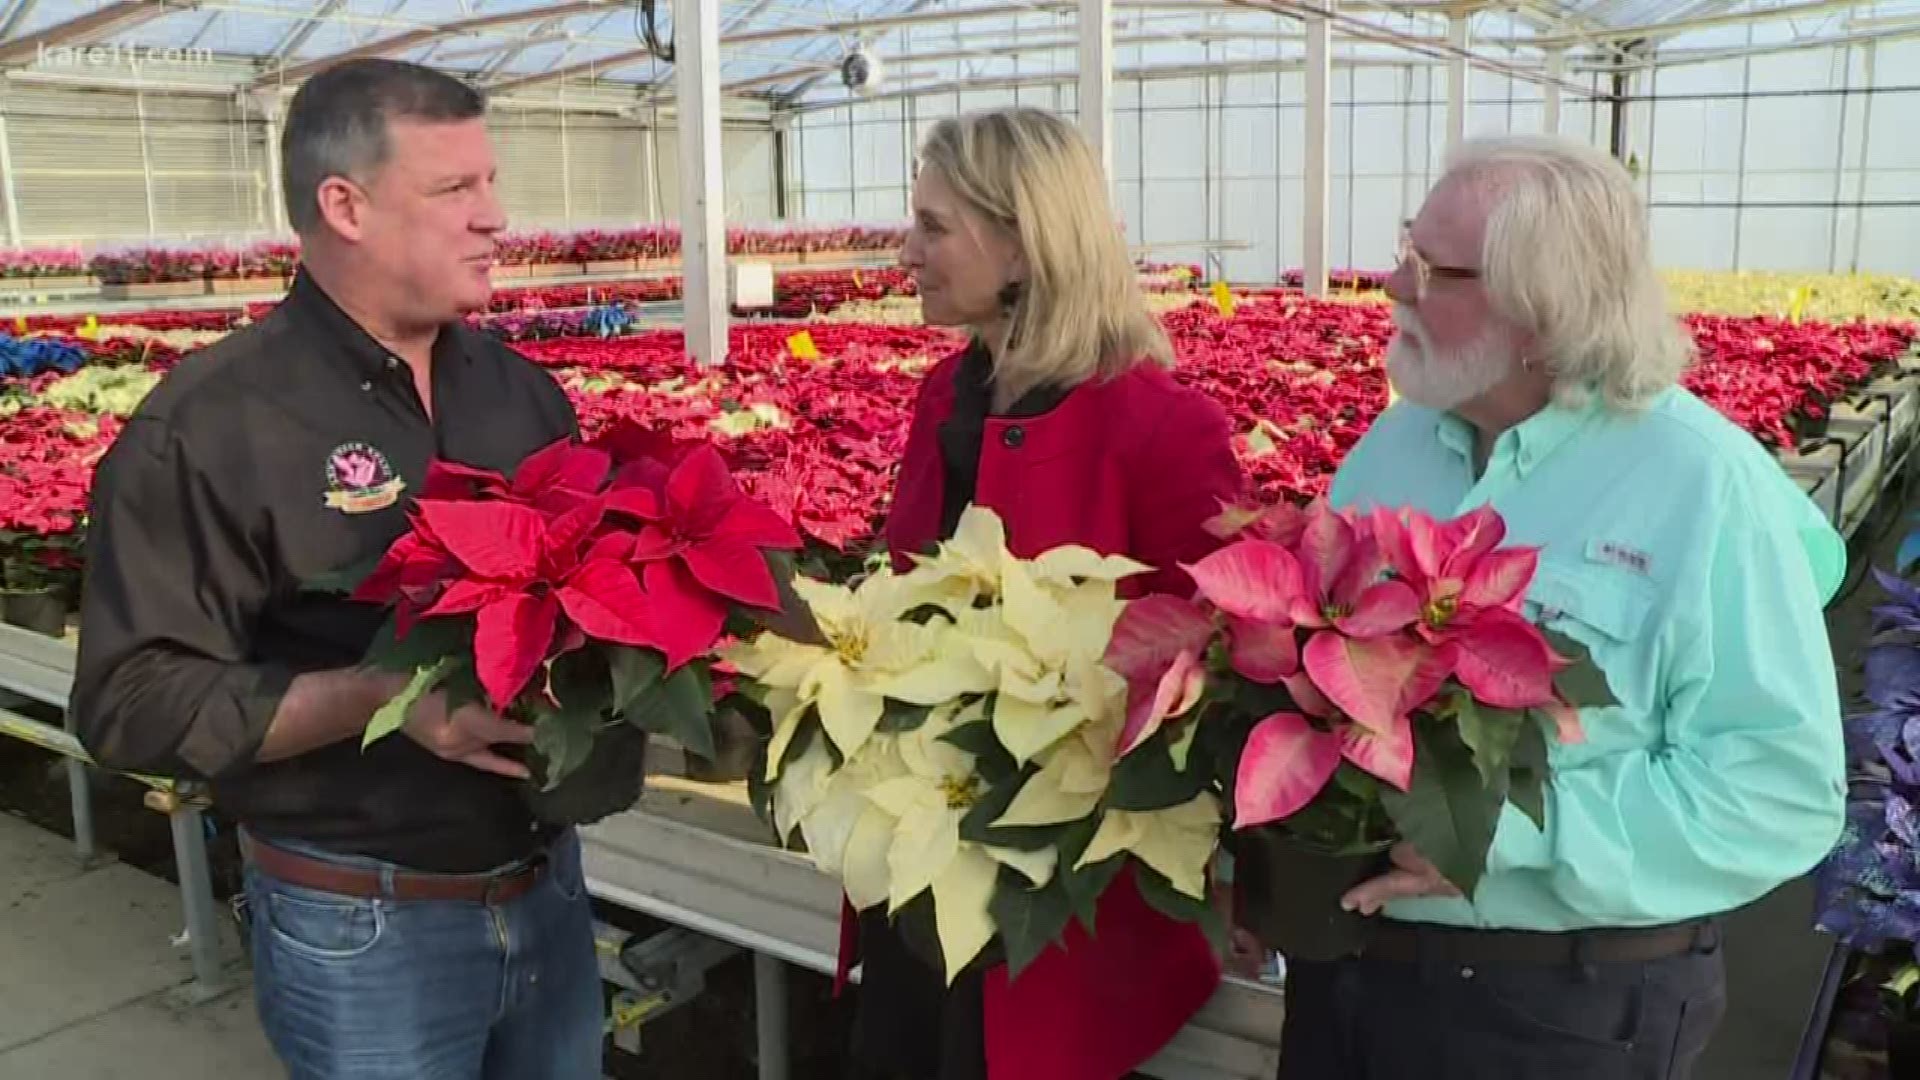 Len Busch Roses shows us how they make these amazing colors and how popular they have become!